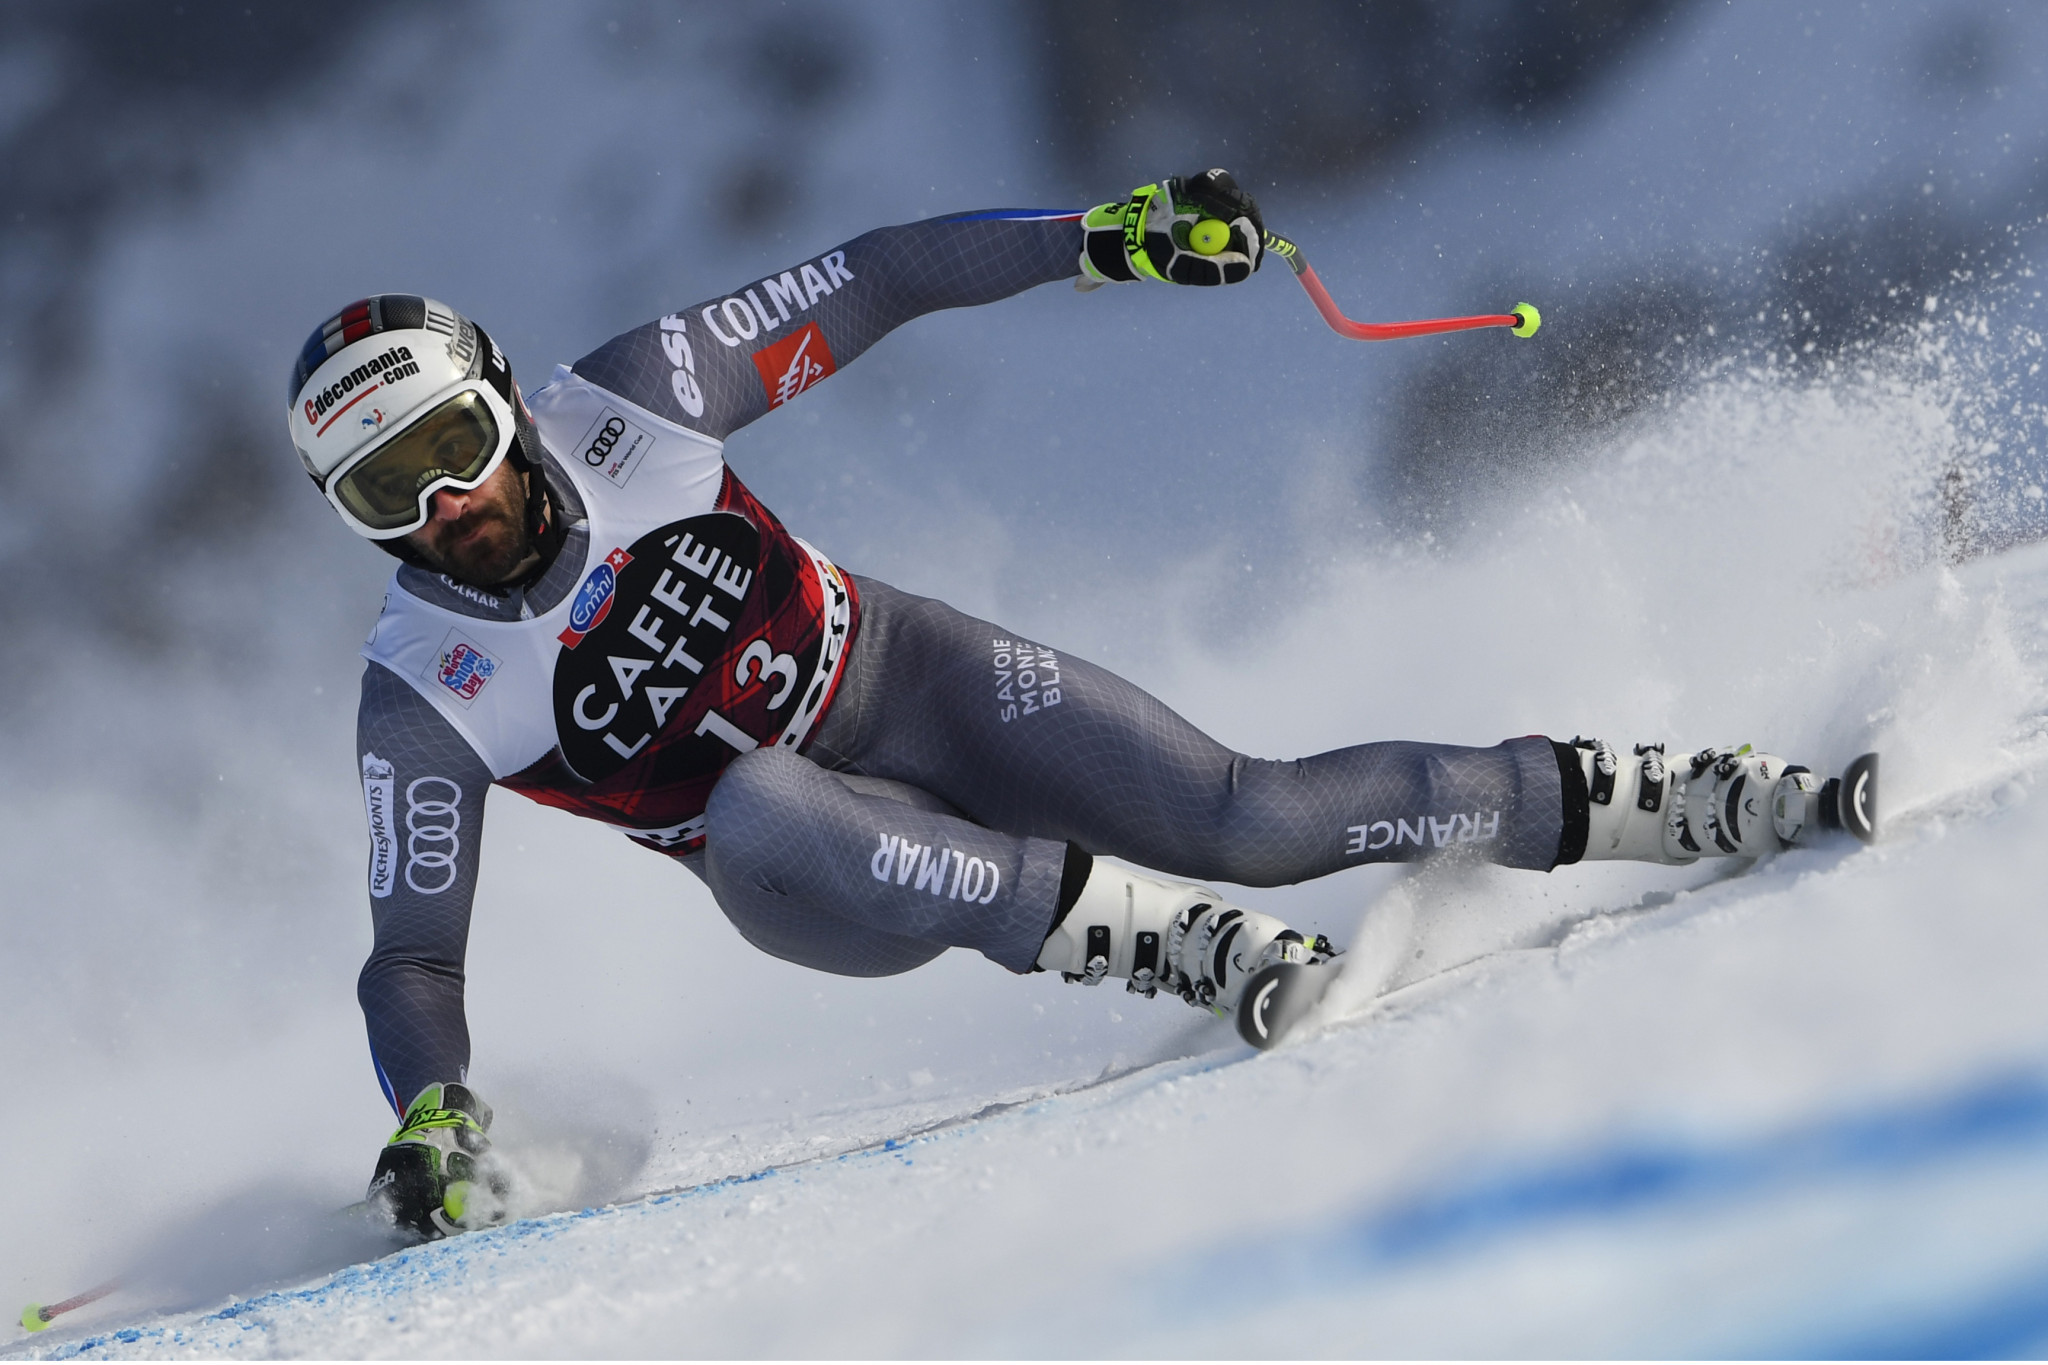 Adrien Theaux was fastest in practice for the upcoming World Cup event in Wengen ©Getty Images